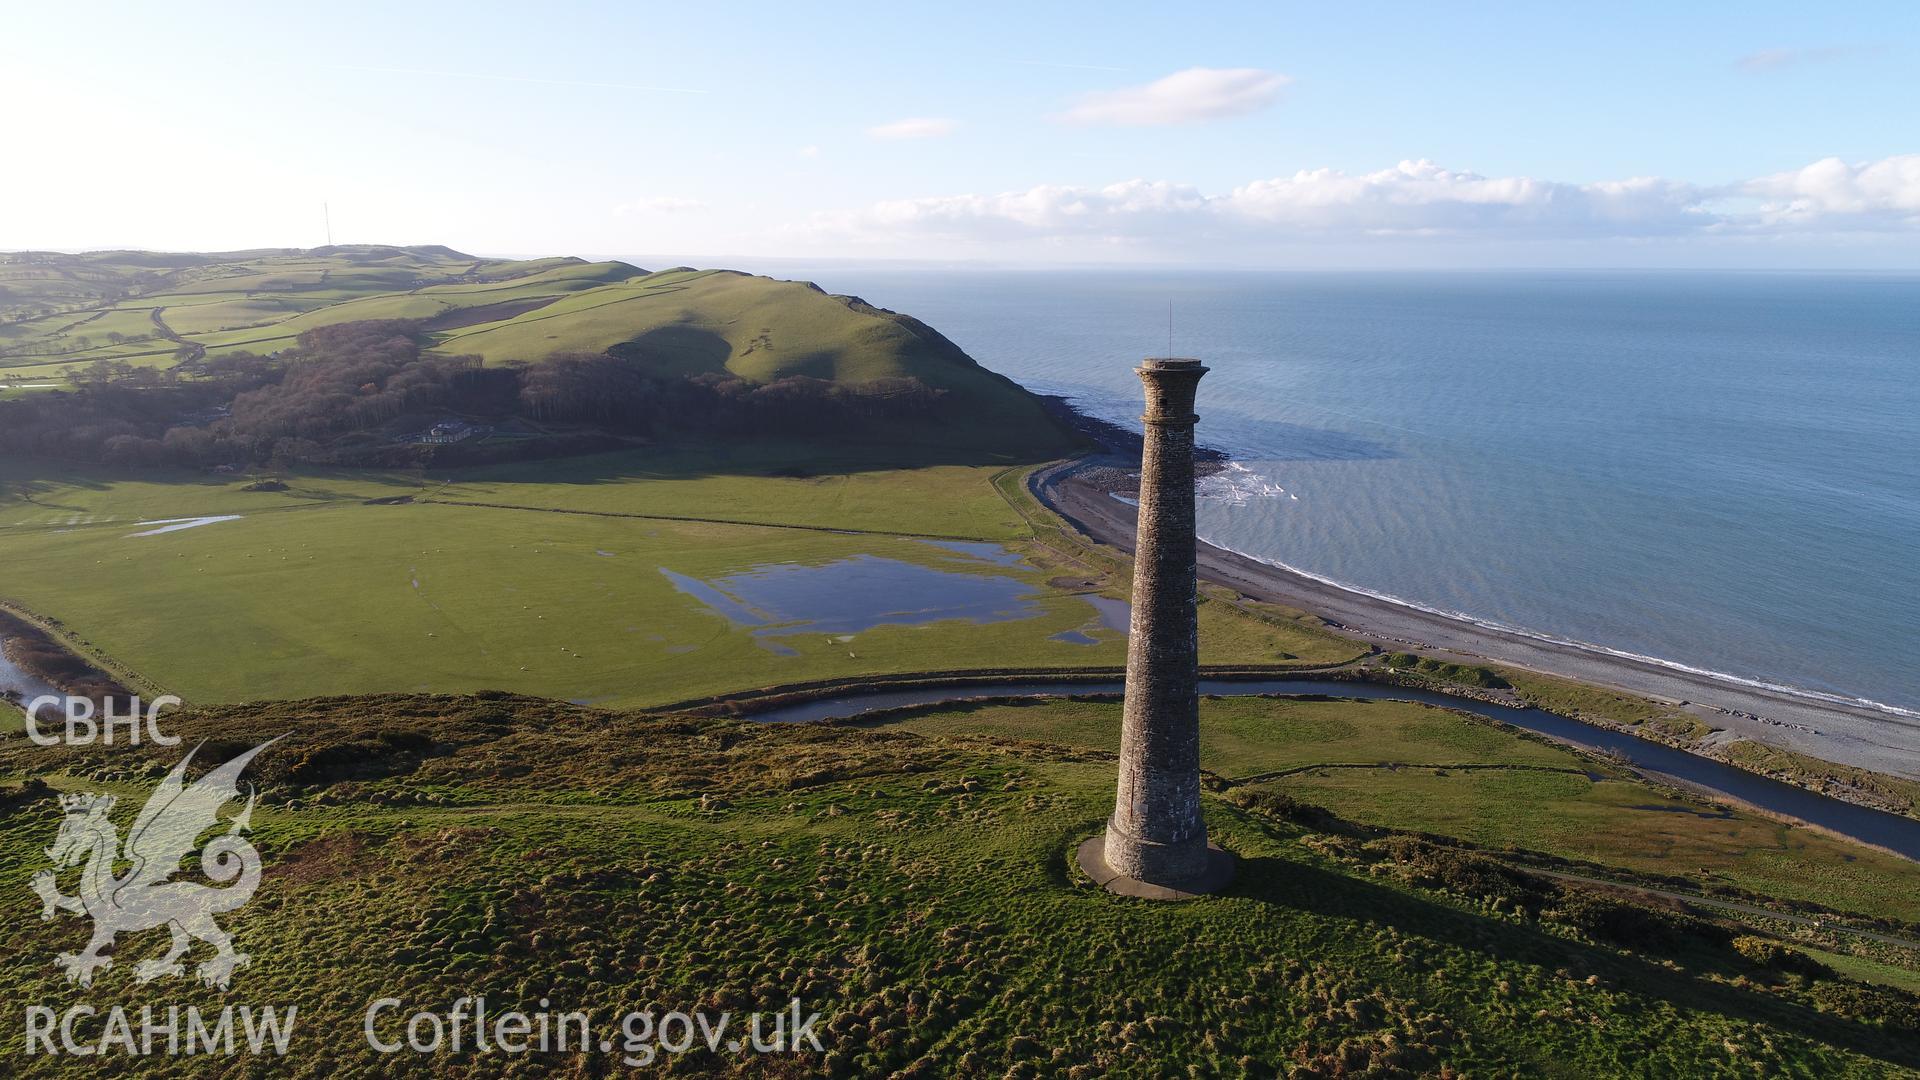 CHERISH Project DJI drone photo survey of Pen Dinas Hillfort and the Wellington Monument. ? Crown: CHERISH PROJECT 2017. Produced with EU funds through the Ireland Wales Co-operation Programme 2014-2020. All material made freely available through the Open Government Licence.